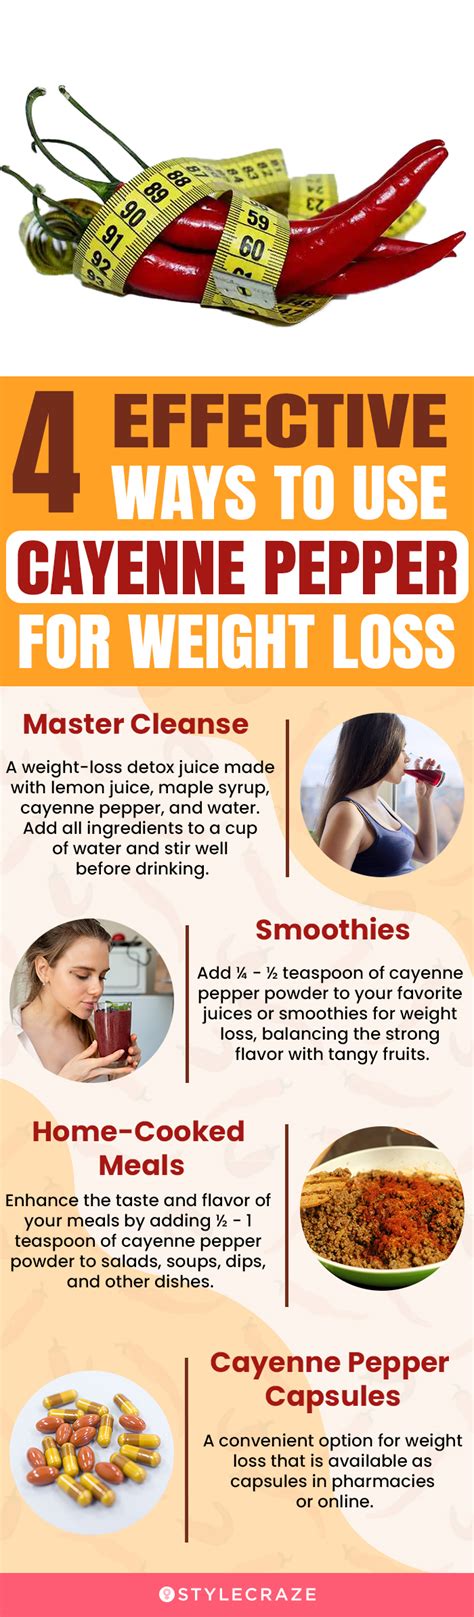 How Much Cayenne Pepper Should You Consume Daily For Weight Loss